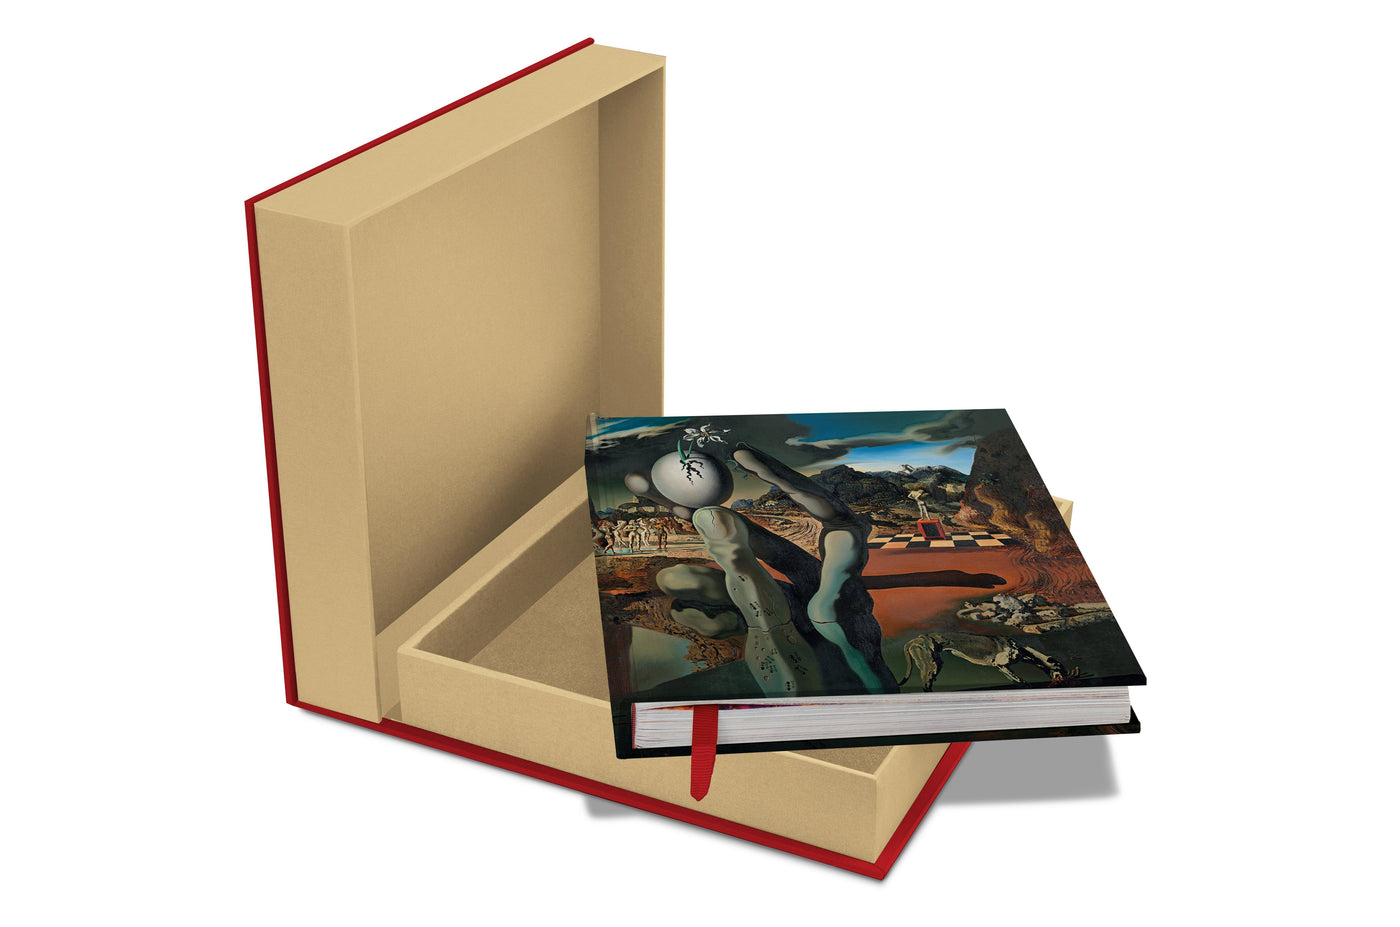 Salvador Dalí: The Impossible Collection